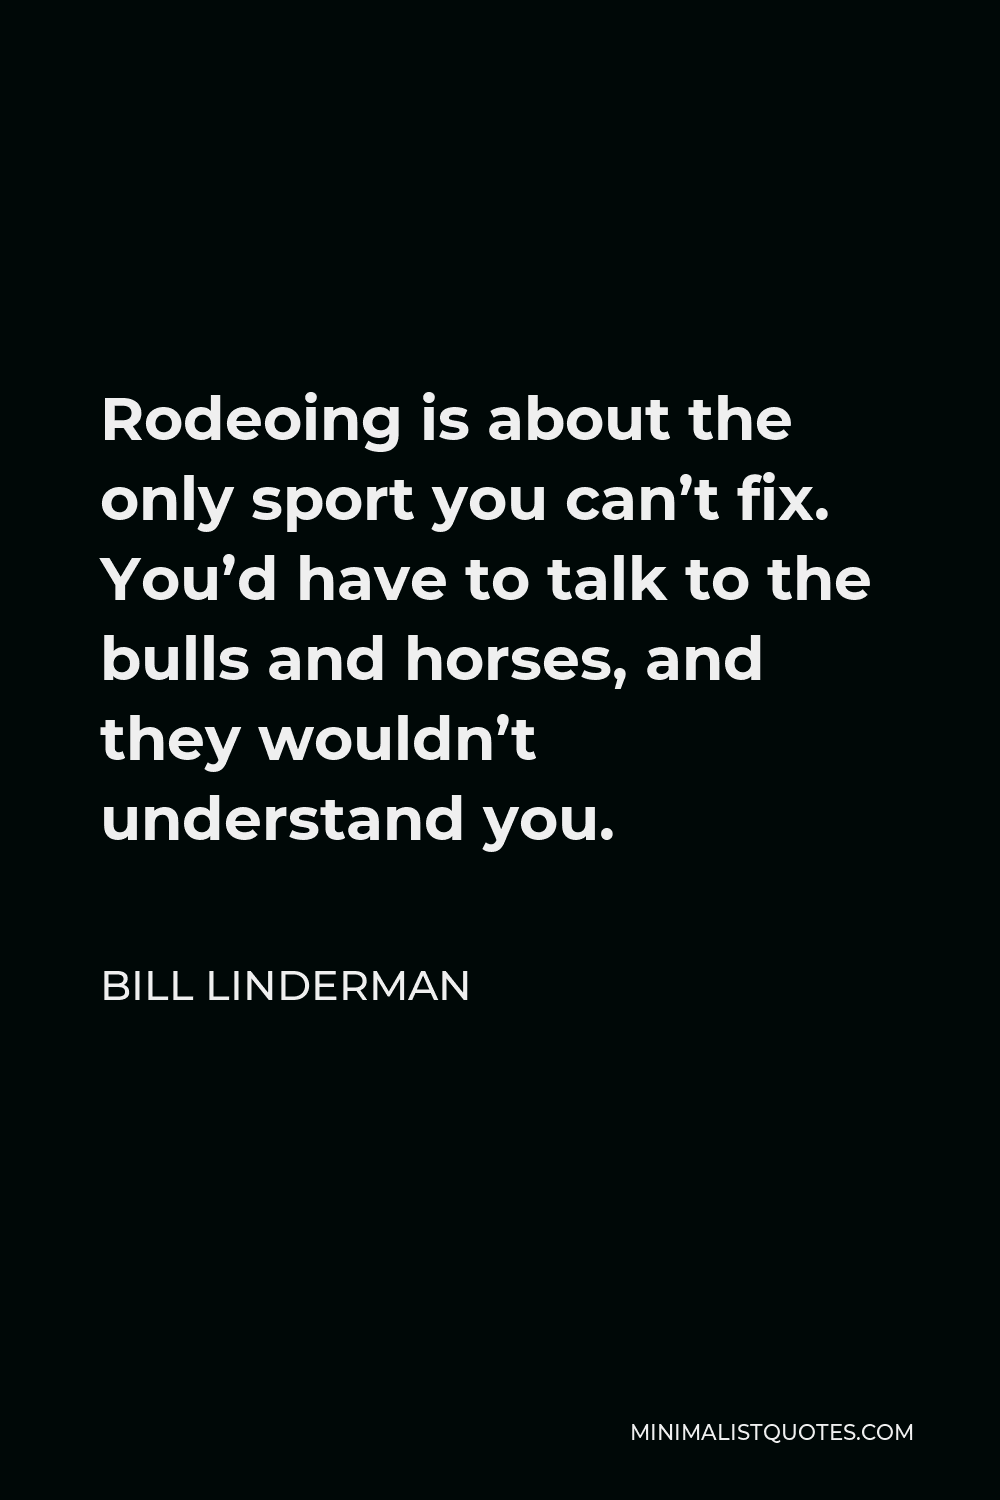 Bill Linderman Quote - Rodeoing is about the only sport you can’t fix. You’d have to talk to the bulls and horses, and they wouldn’t understand you.